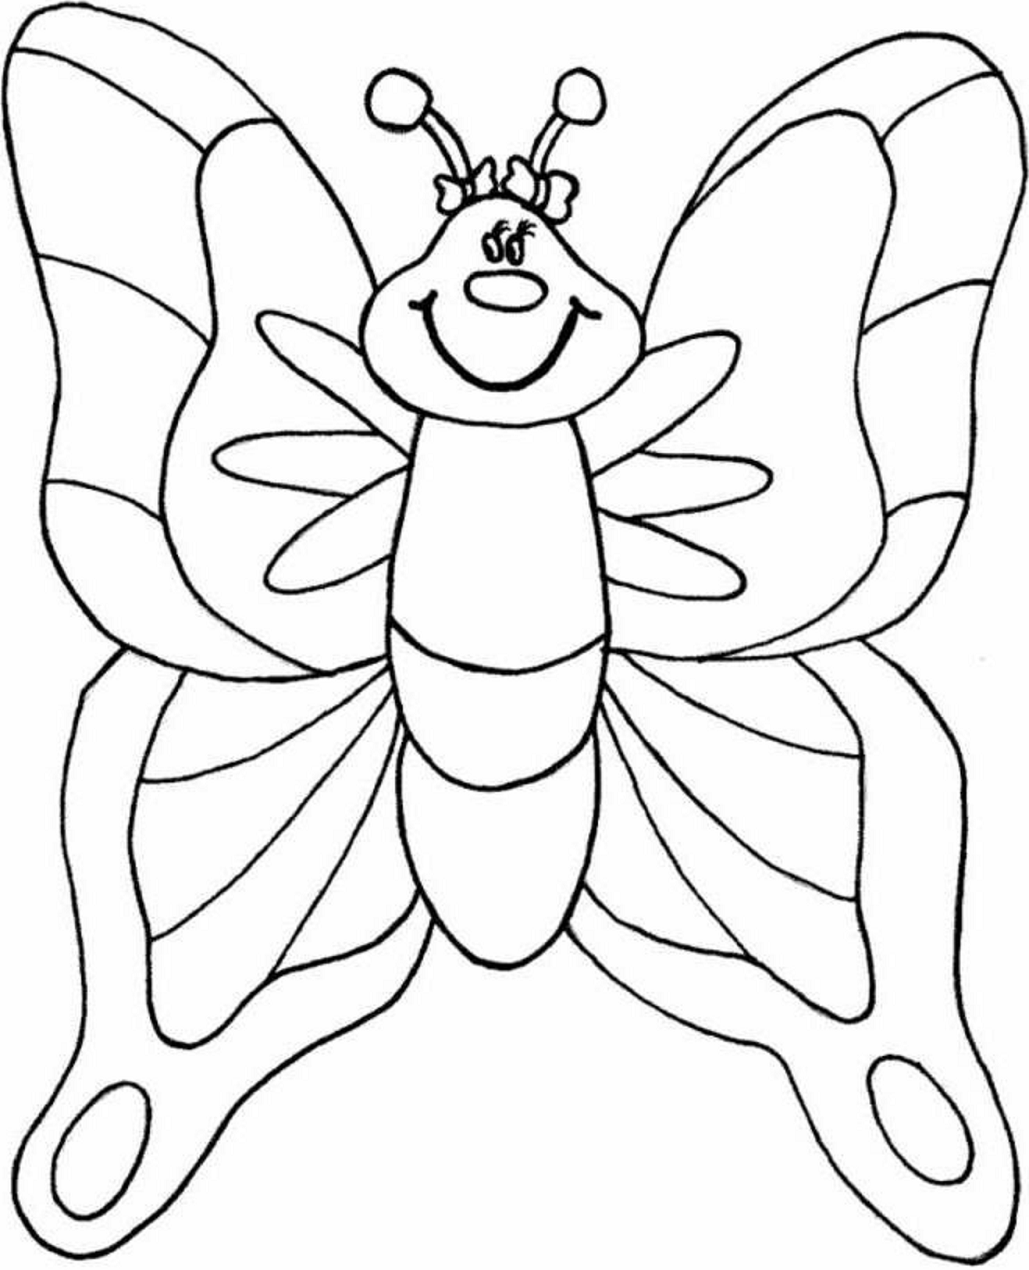 butterfly for child preschool coloring page free printable coloring